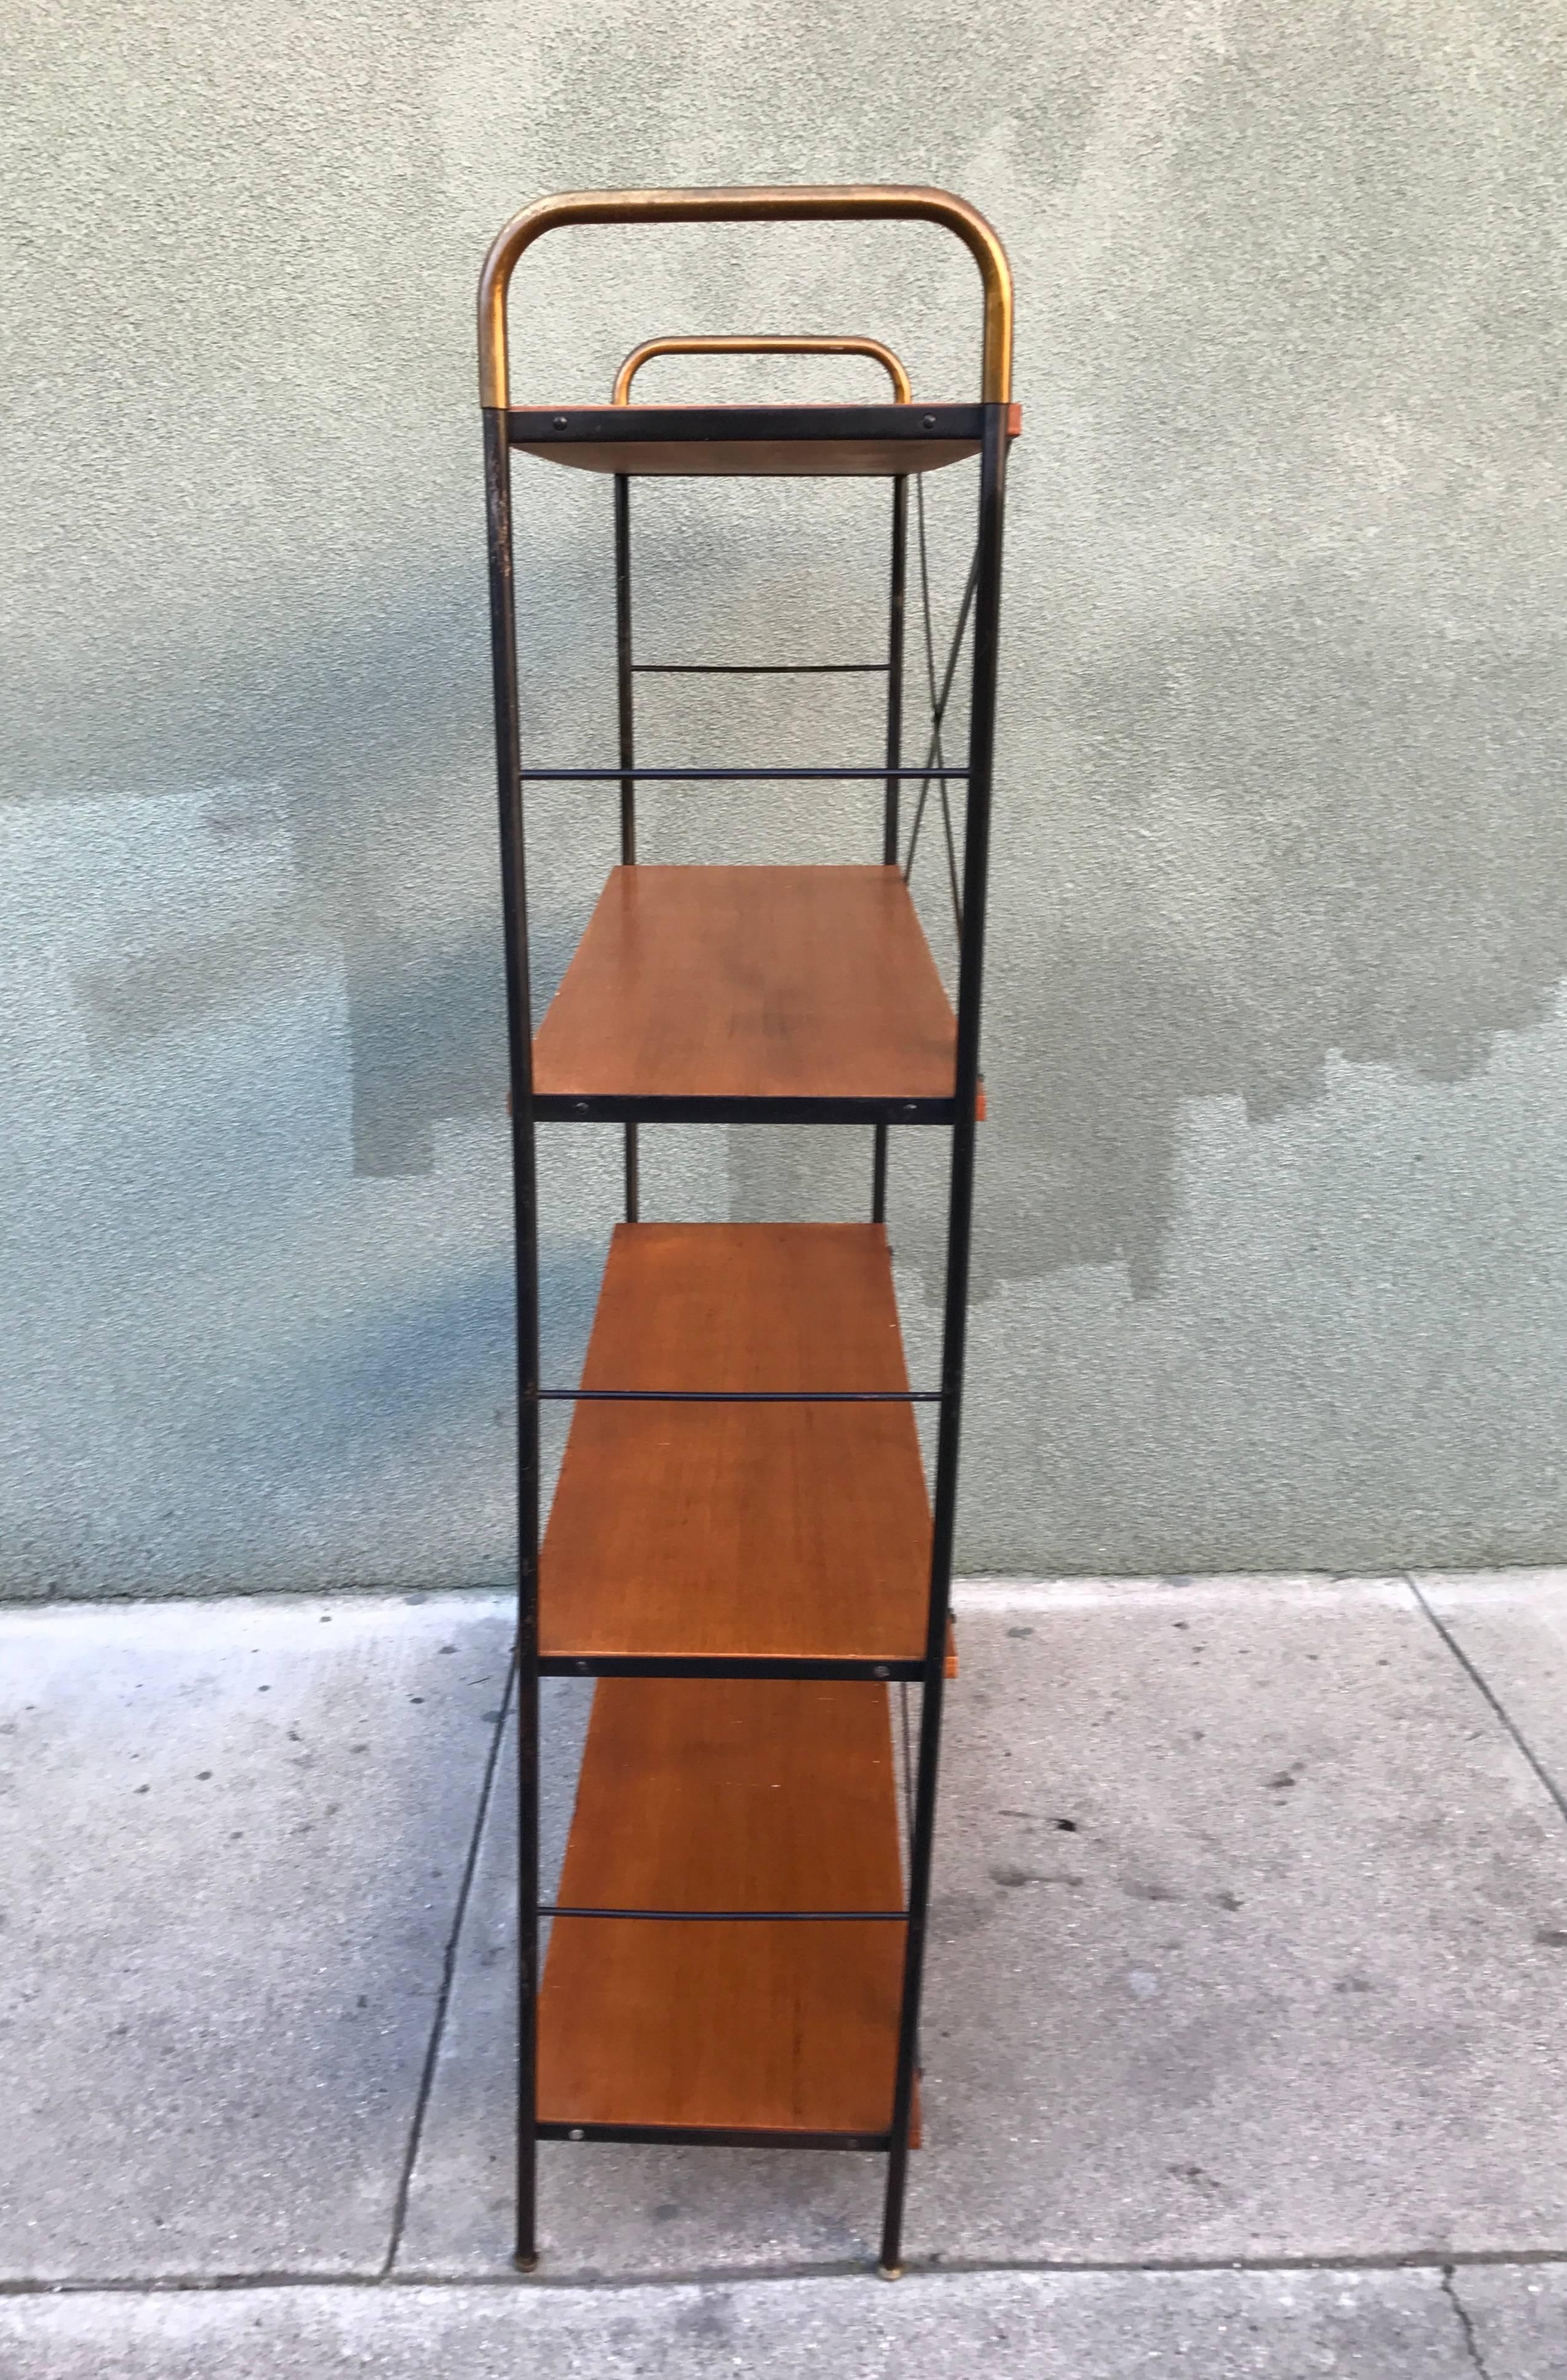 Early 1950s Vista of California shelf unit constructed of a painted iron frame, oiled mahogany shelves with brass accents and adjustable glides to compensate for uneven floors. All original condition with patina to paint and wood surfaces. Nice